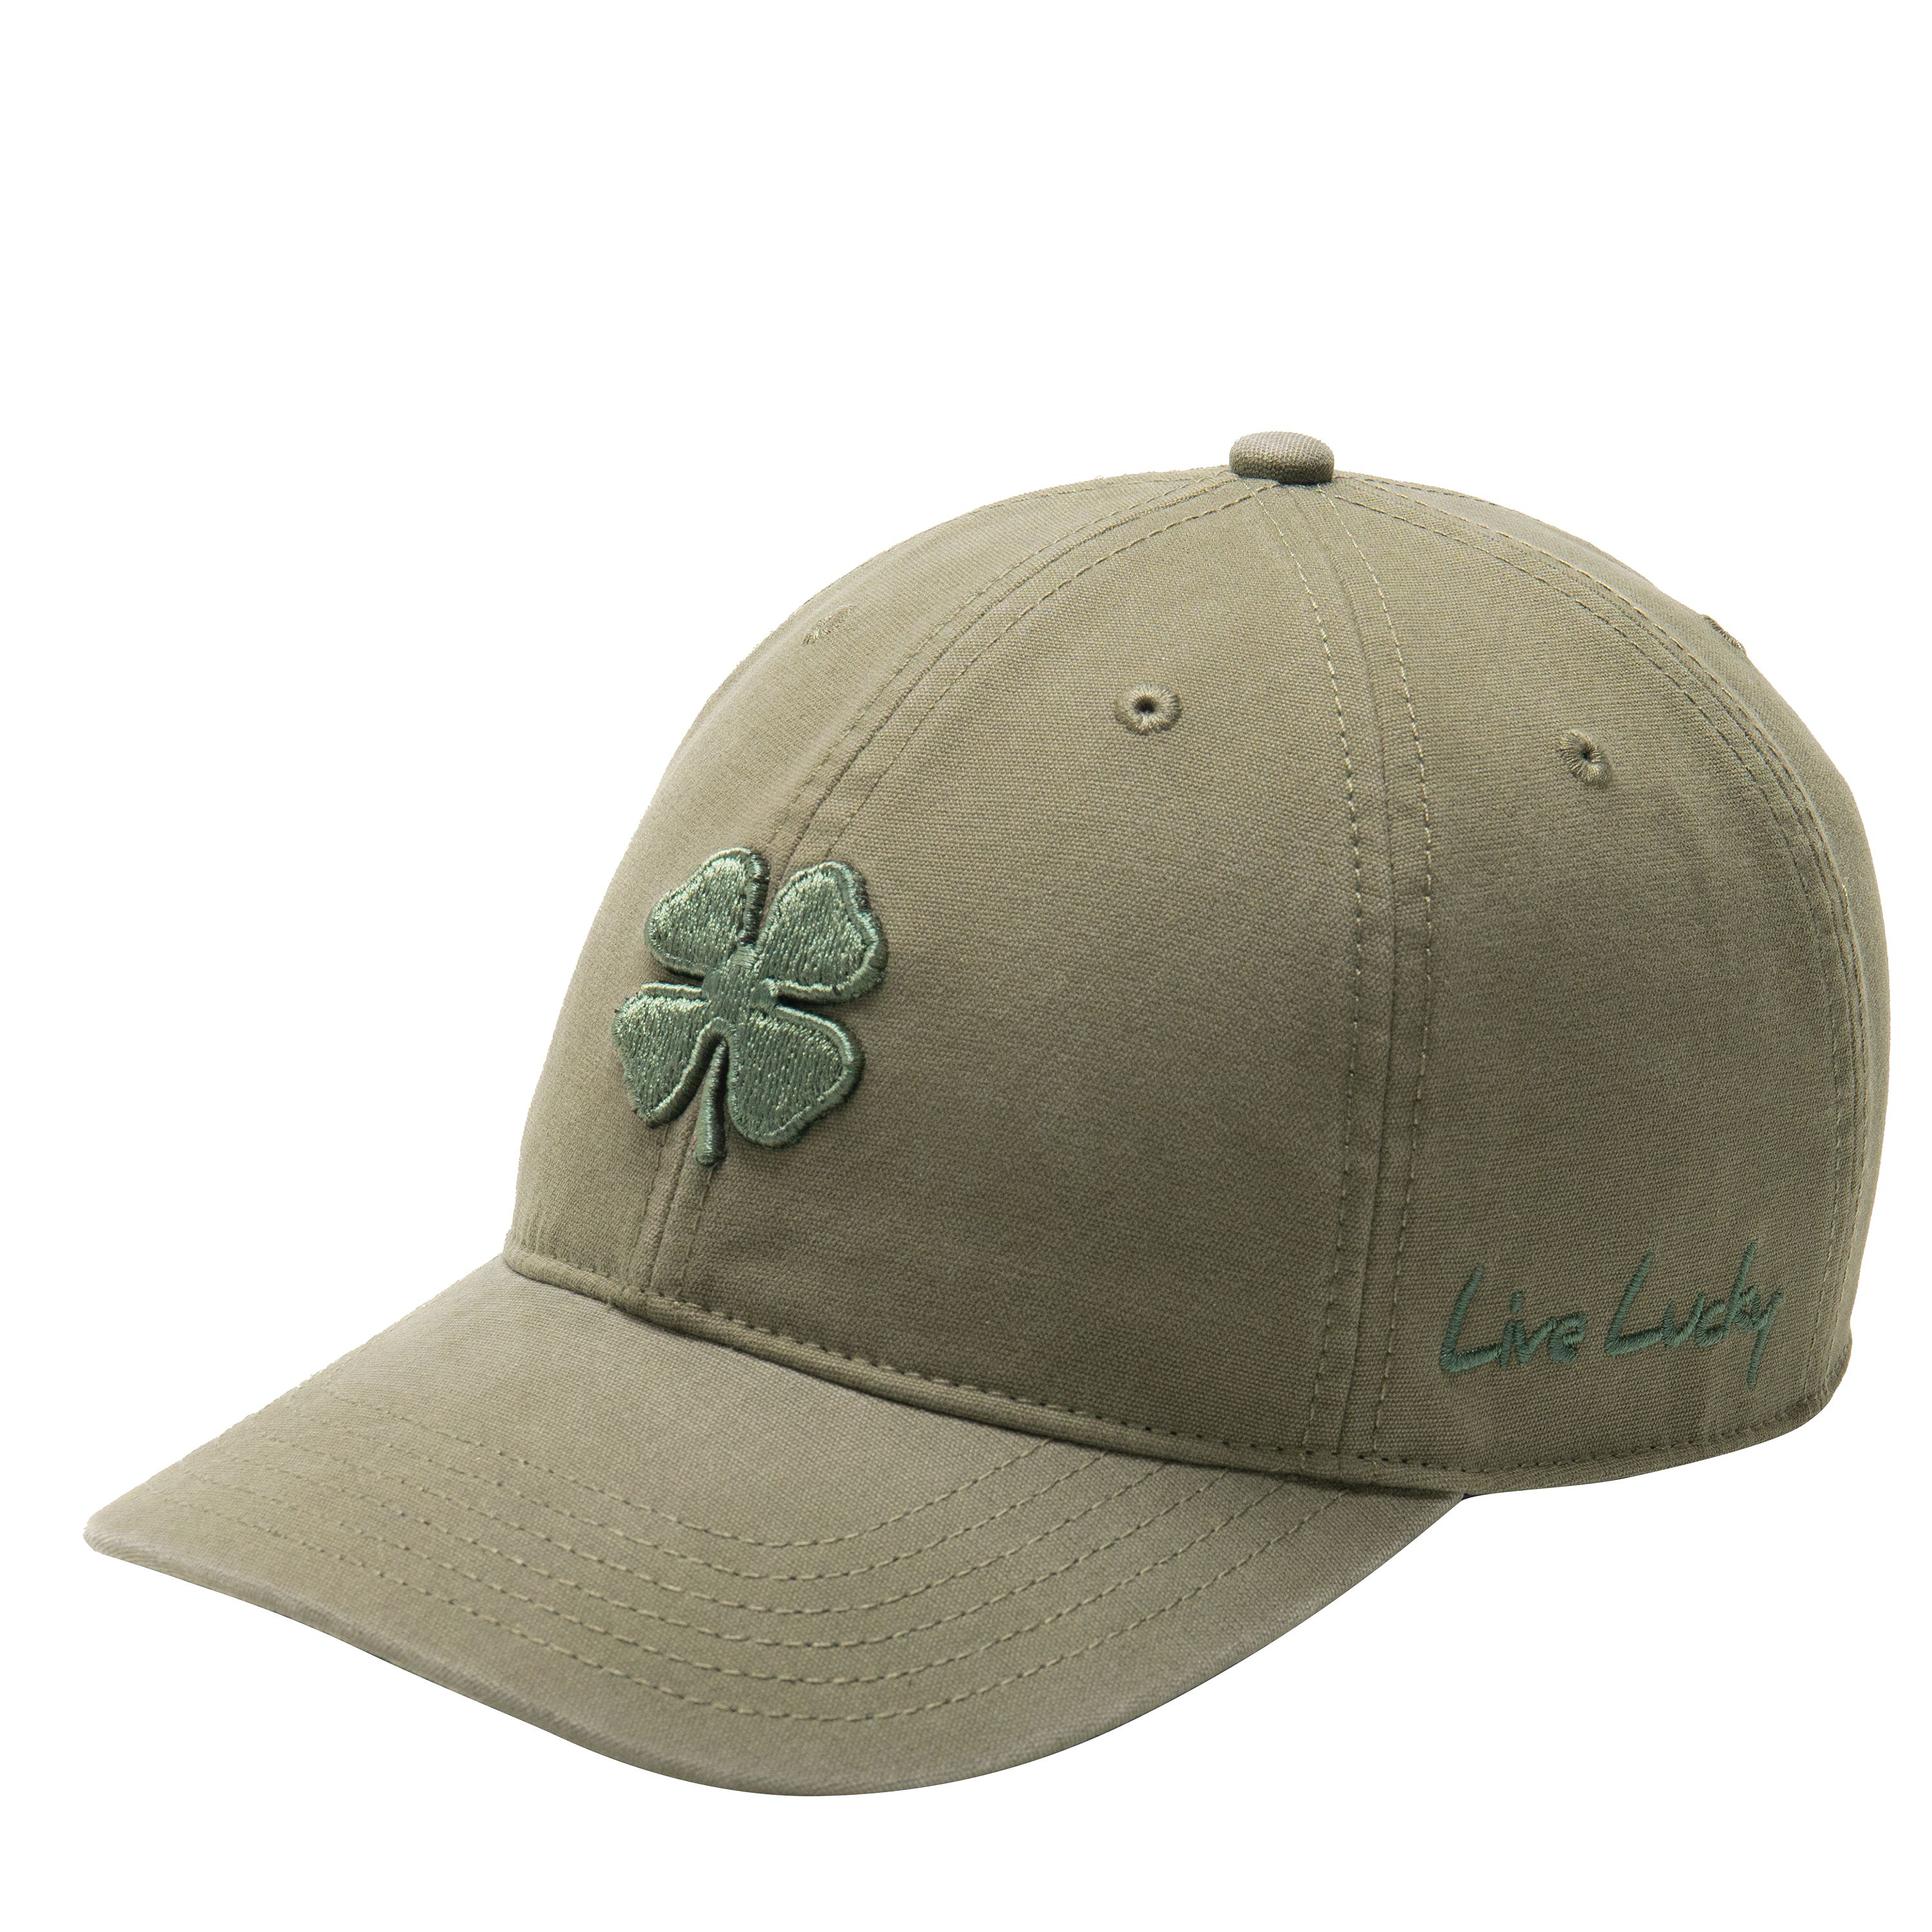 Black Clover Shade Patch Hat | Bass Pro Shops